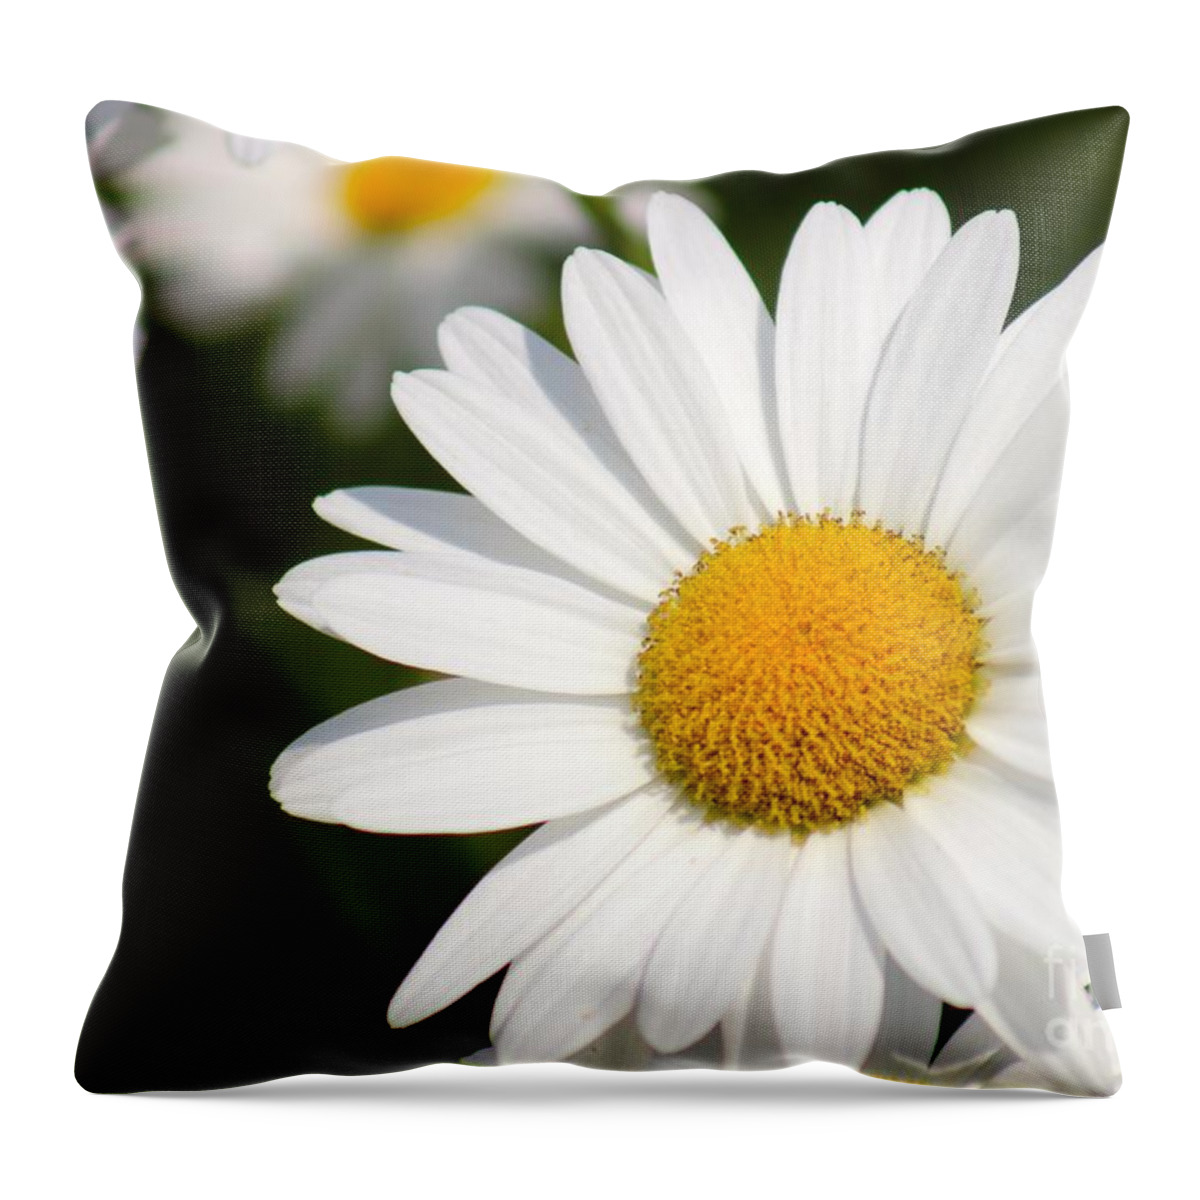 Yellow Throw Pillow featuring the photograph Nature's Beauty 54 by Deena Withycombe